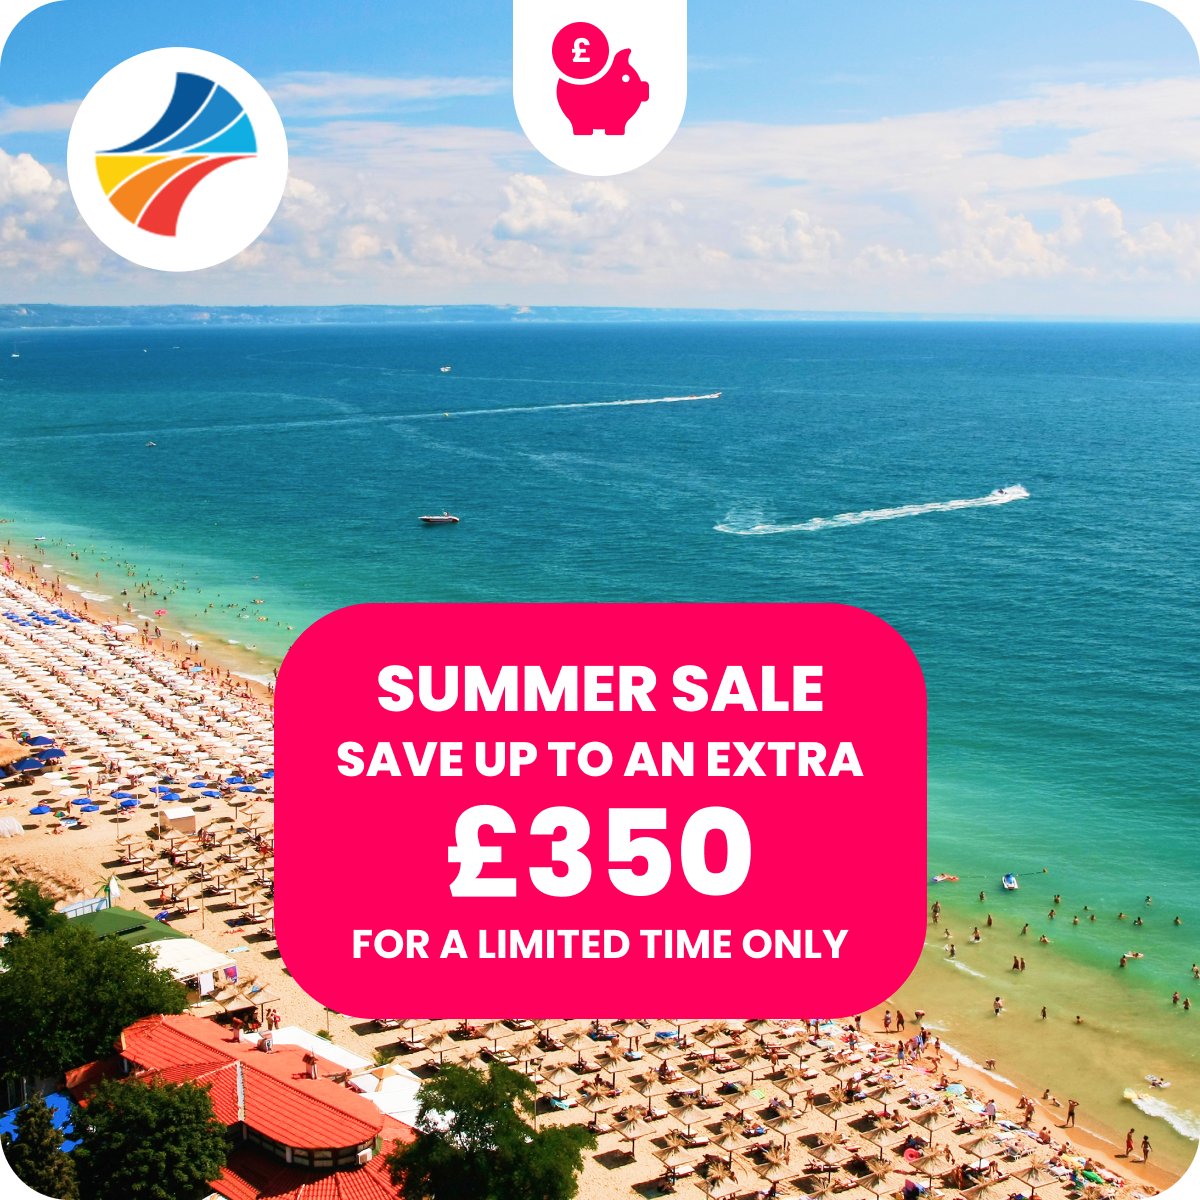 🌟 With our Our Spectacular Summer Sale you can SAVE UP TO AN EXTRA £350 on summer holidays to Bulgaria, Malta, Northern Cyprus, Croatia, Slovenia and Montenegro! 🥰 🔥 Book now and save BIG: bit.ly/3UdXo4q